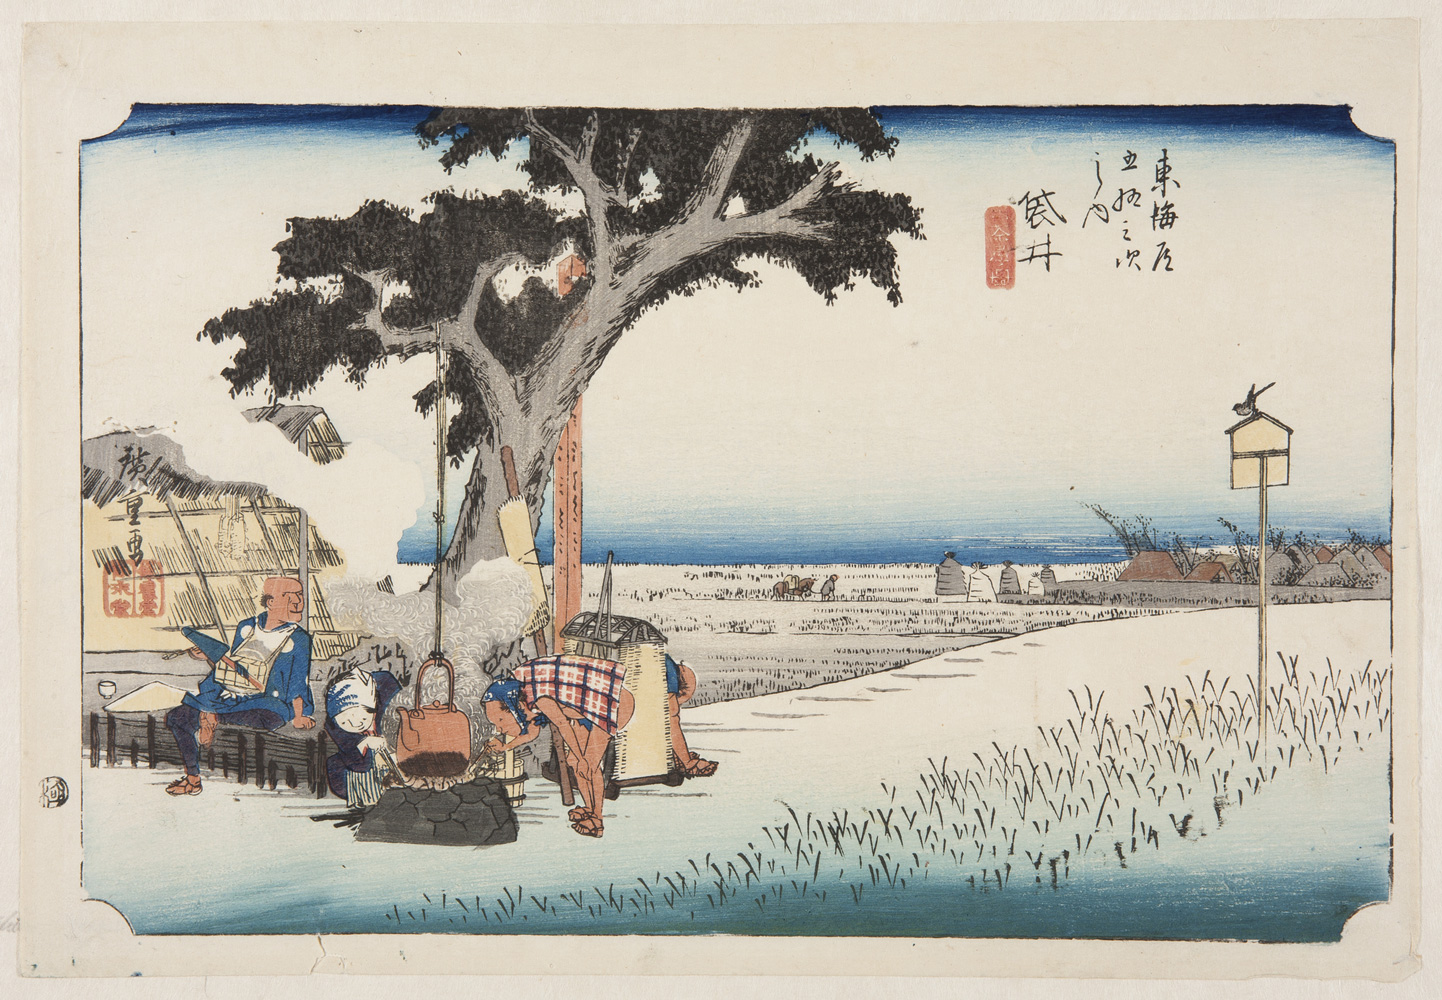 japanese print of a landscape with flat rice fields in the background. in the foreground, a kettle of tea heats up on a fire in front of a tree. a man is stooping down taking a drink of tea while a woman tends to the fire. another man rests on a bench